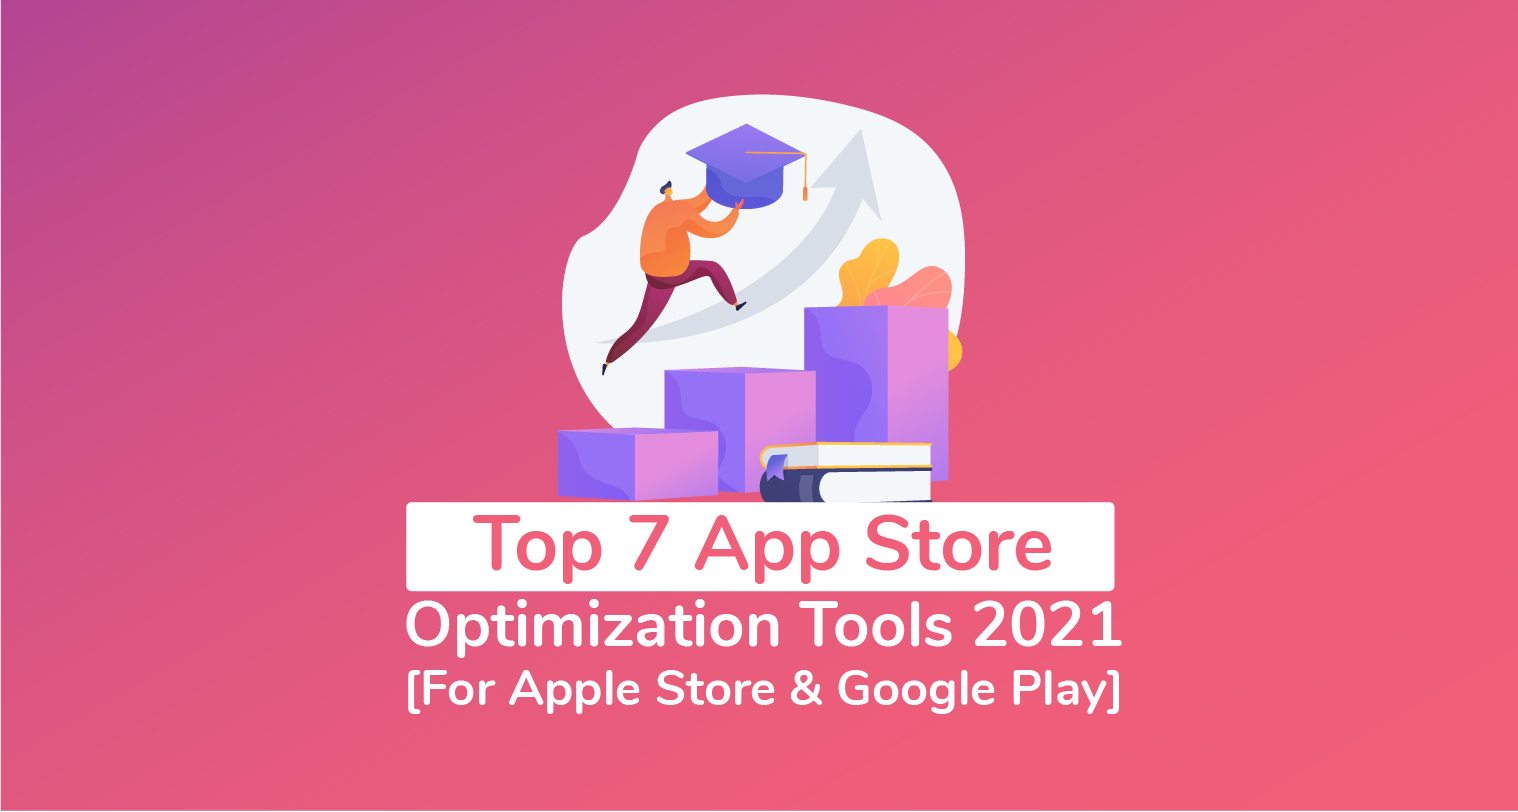 Top 7 App Store Optimization Tools 2021 [For Apple Store & Google Play]